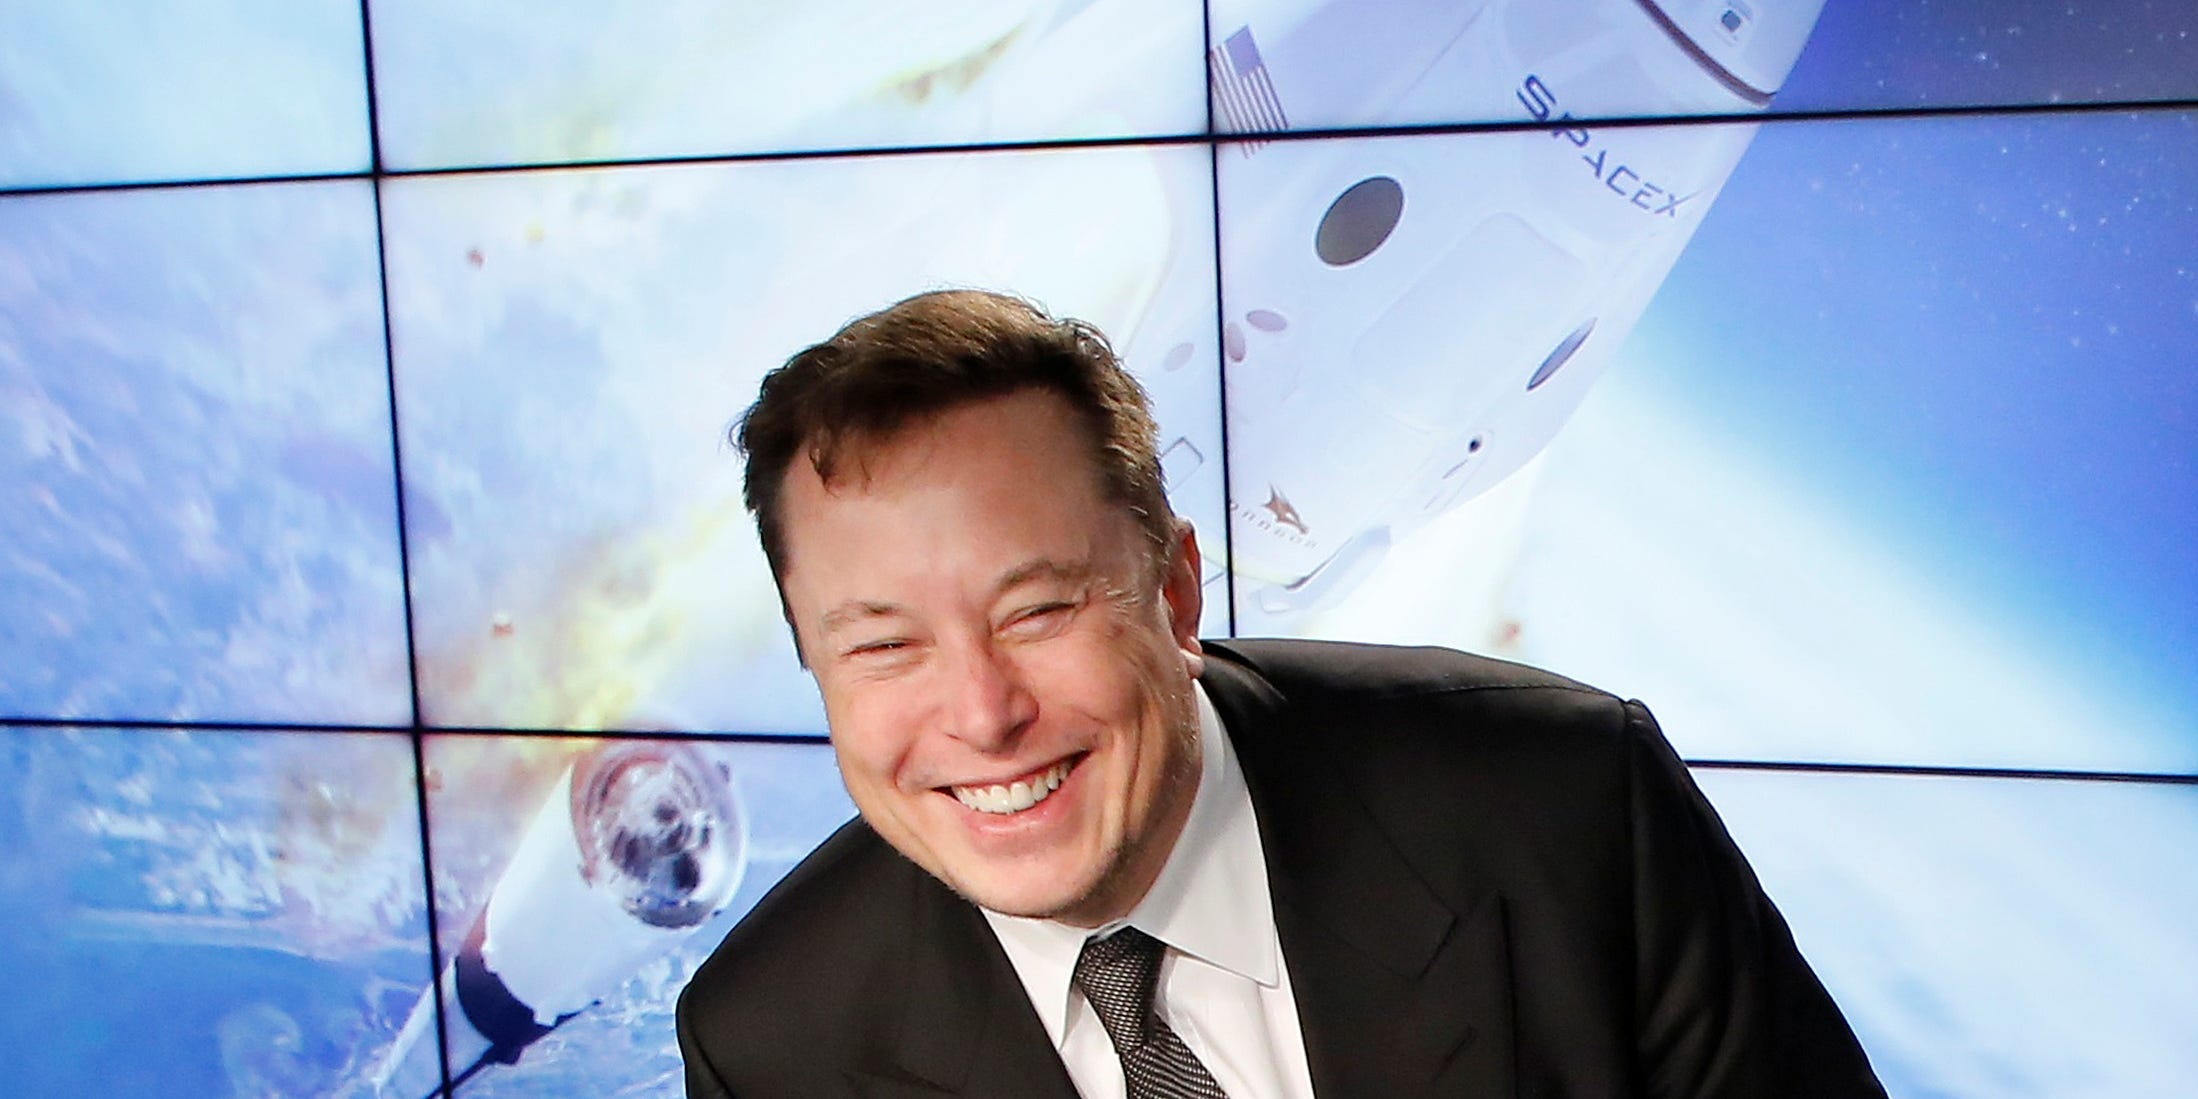 SpaceX founder and chief engineer Elon Musk at a news conference